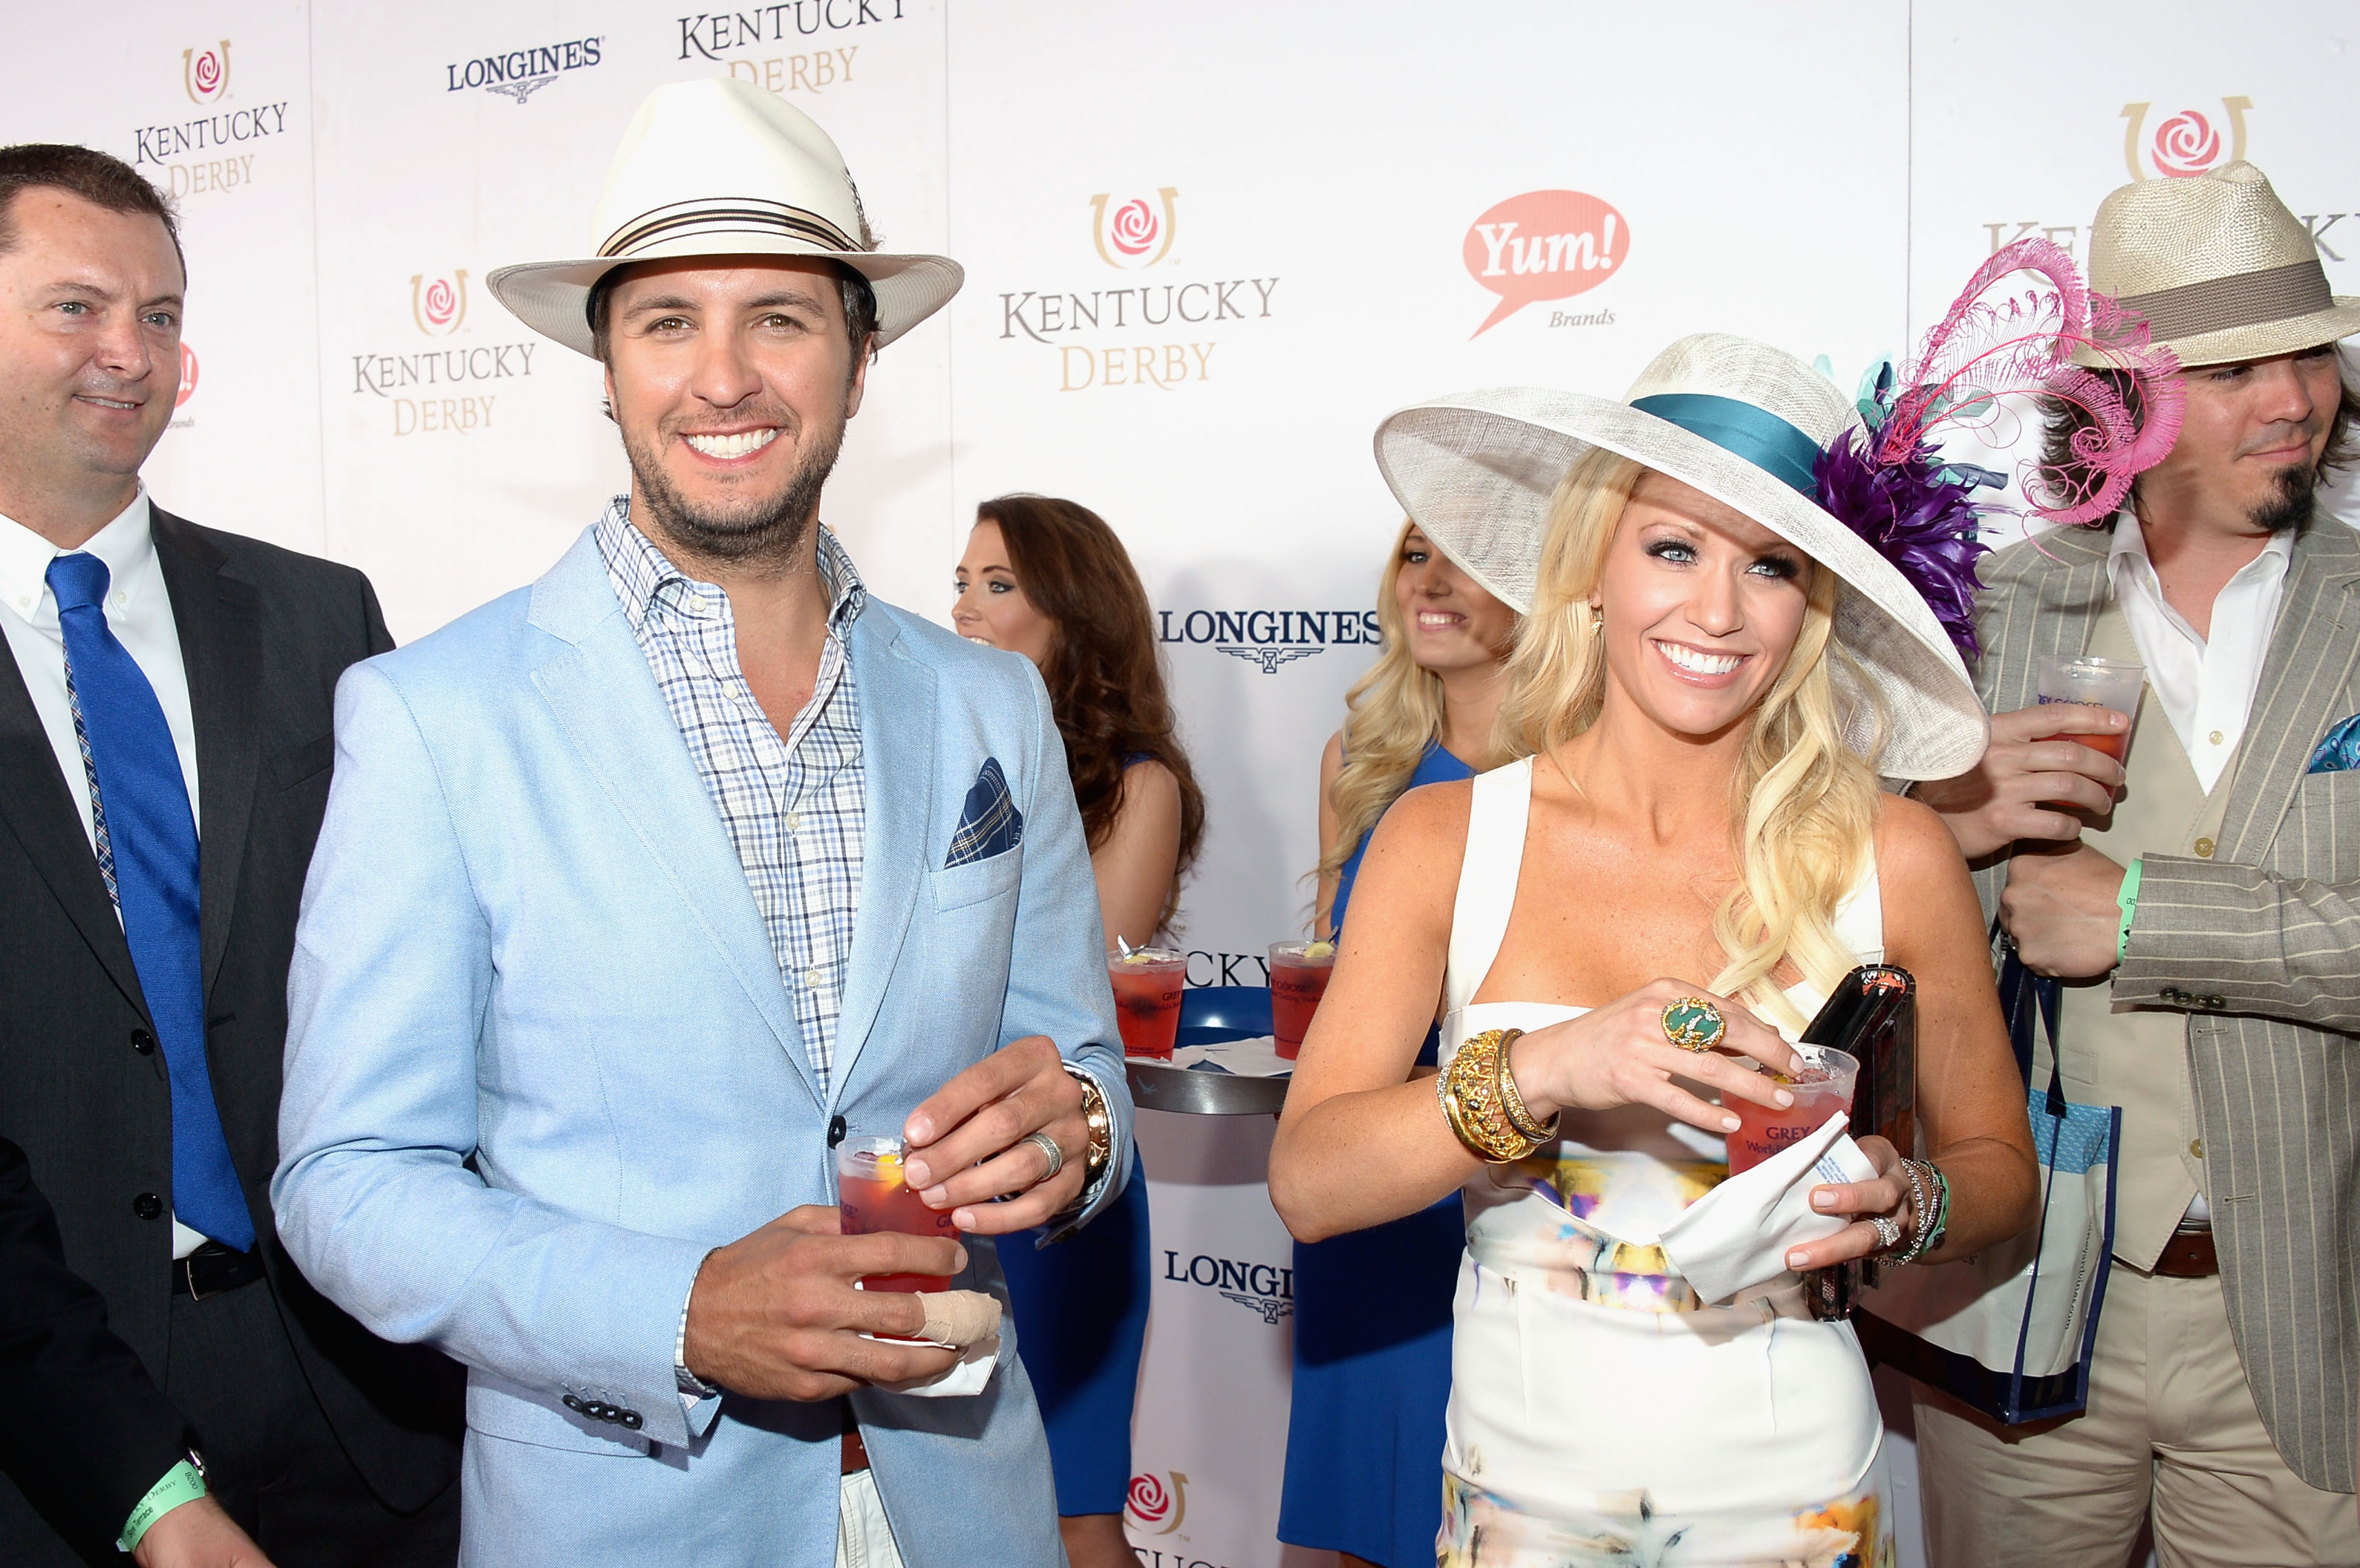 LOUISVILLE, KY - MAY 04: Luke Bryan and Caroline Boyer at the GREY GOOSE Red Carpet Lounge at the Kentucky Derby at Churchill Downs on May 4, 2013 in Louisville, Kentucky.  (Photo by Theo Wargo/Getty Images for GREY GOOSE)